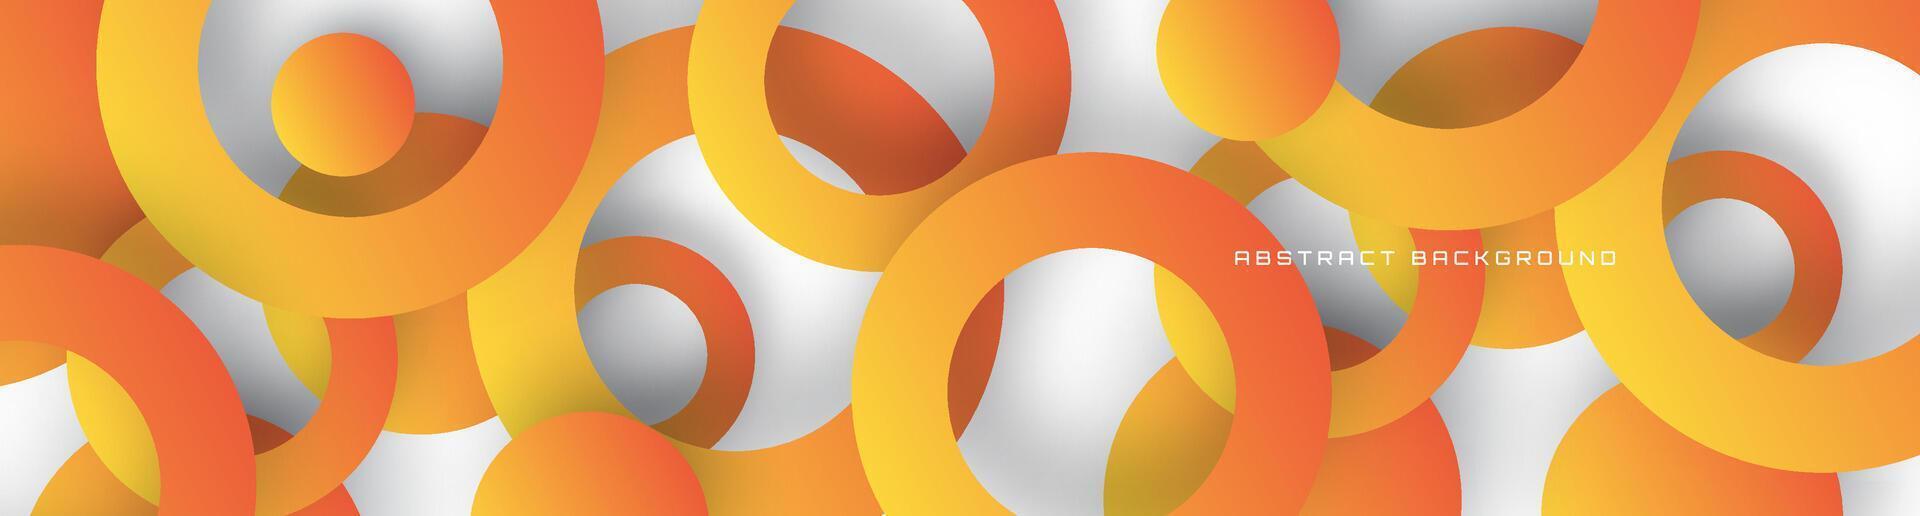 3D orange white geometric background overlap layer on bright space with circles shapes decoration. Minimalist graphic design element cutout style concept for banner, flyer, card, cover, or brochure vector